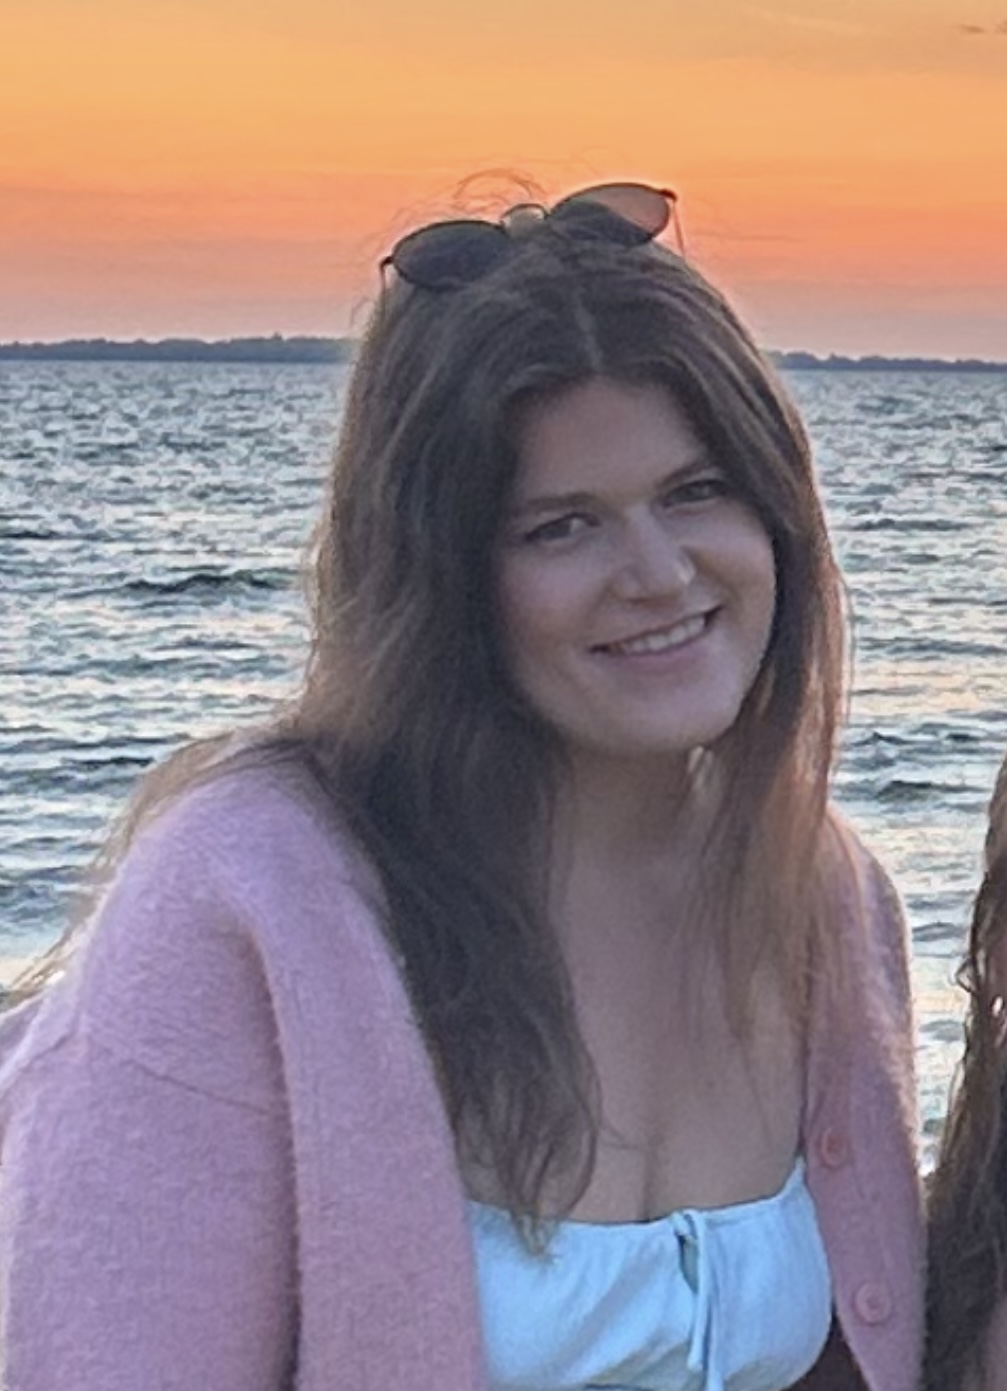 Nicole is a white woman with long brown hair. She is wearing a pink shirt and sunglasses in her head. She' standing in front of a lake at sunset.